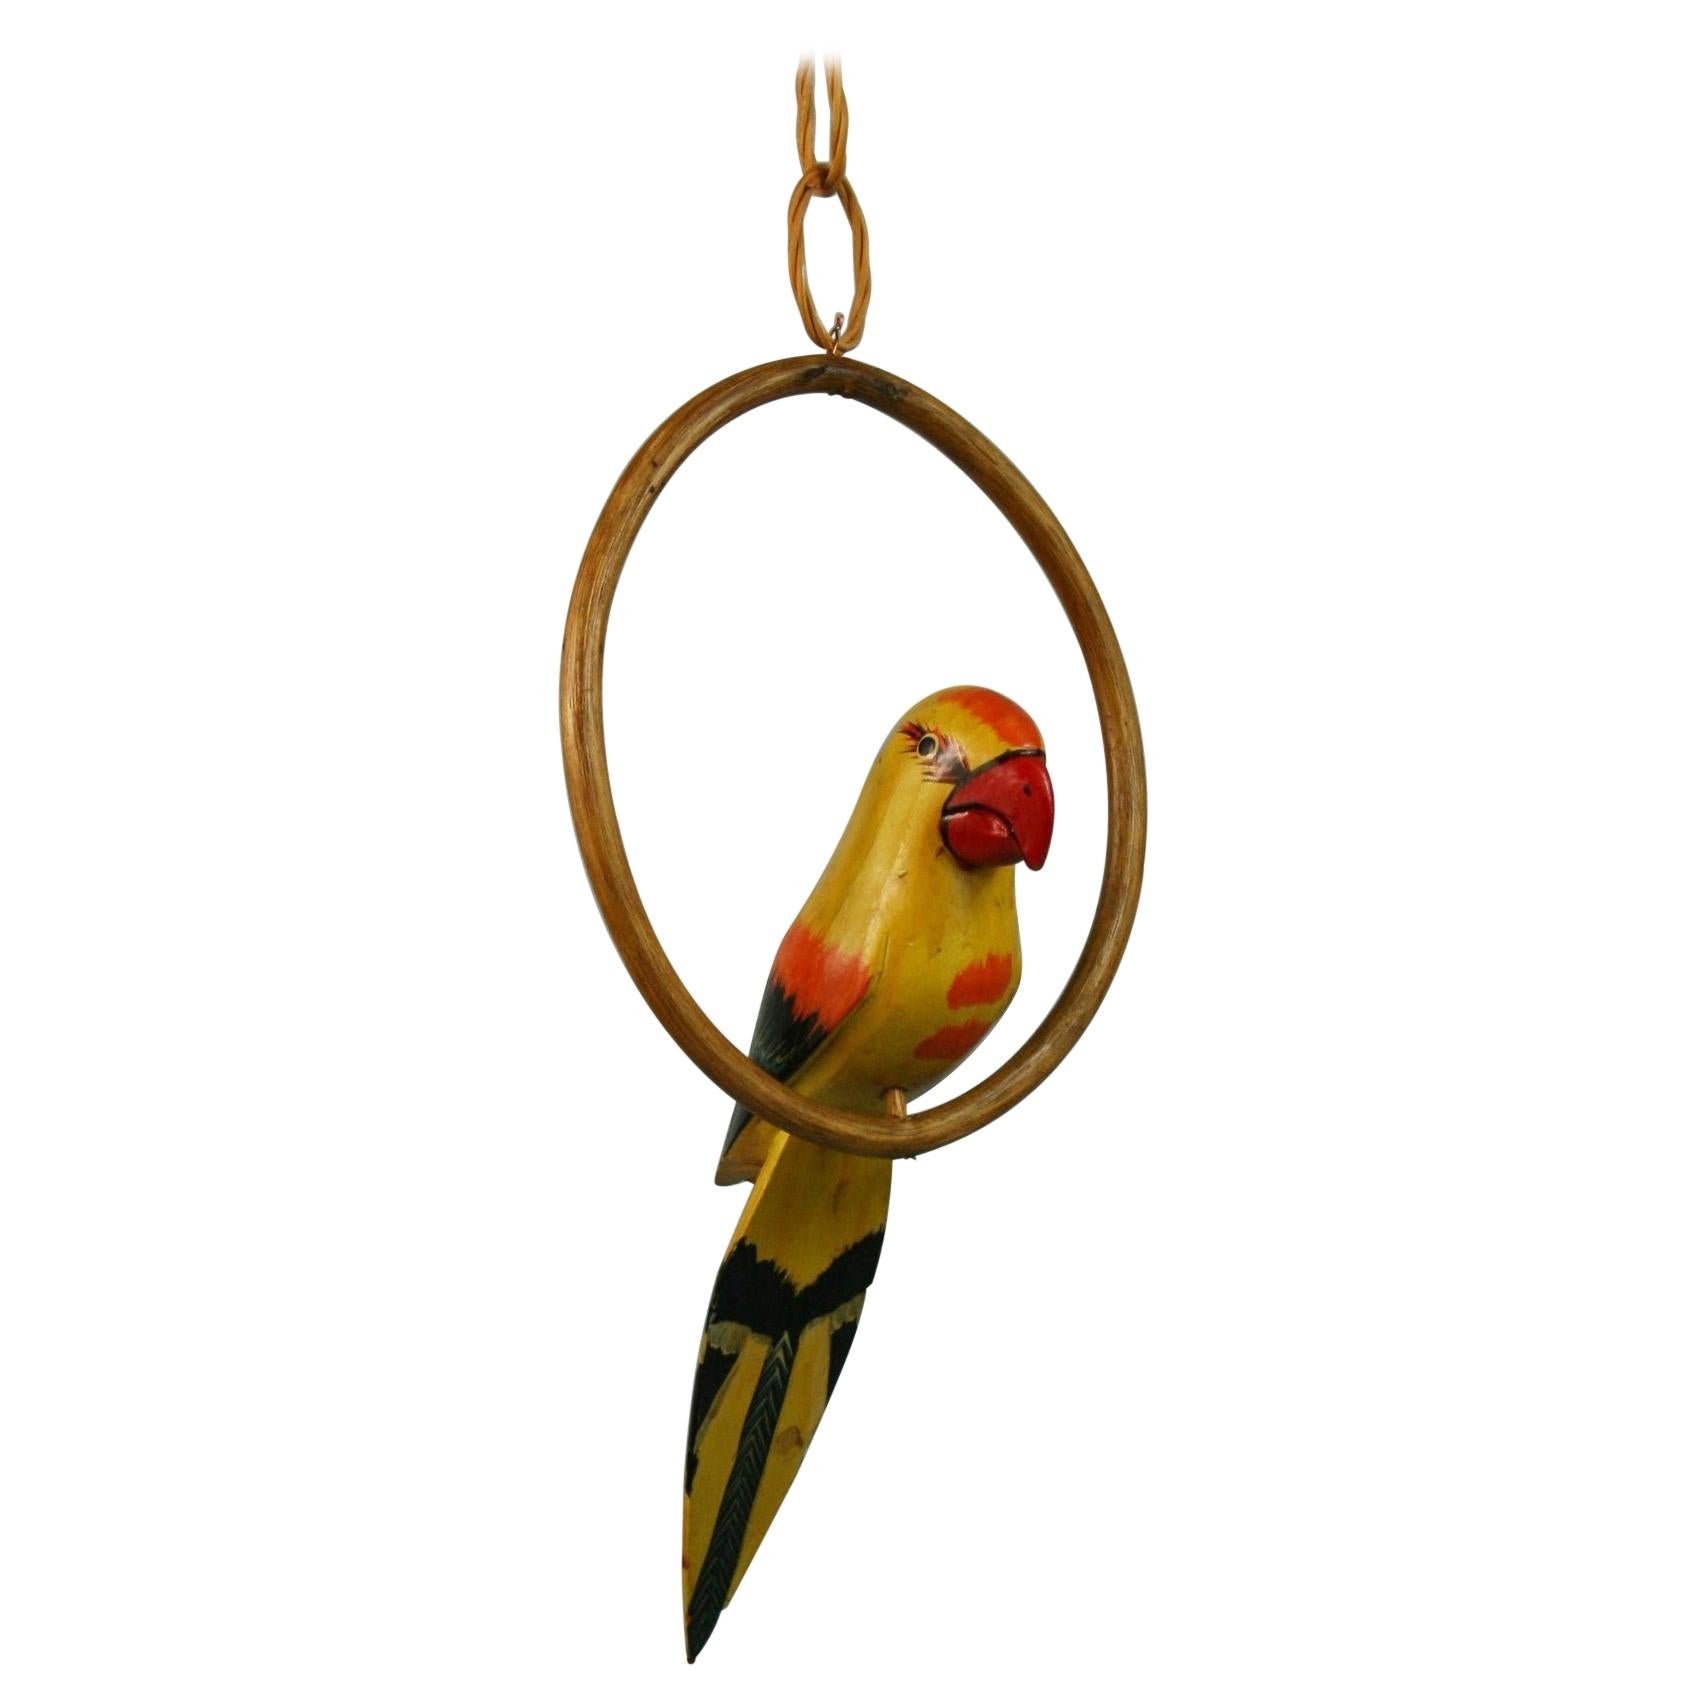 Folk Art Hand Carved and Painted Yellow Parrot Sculpture On a Swing